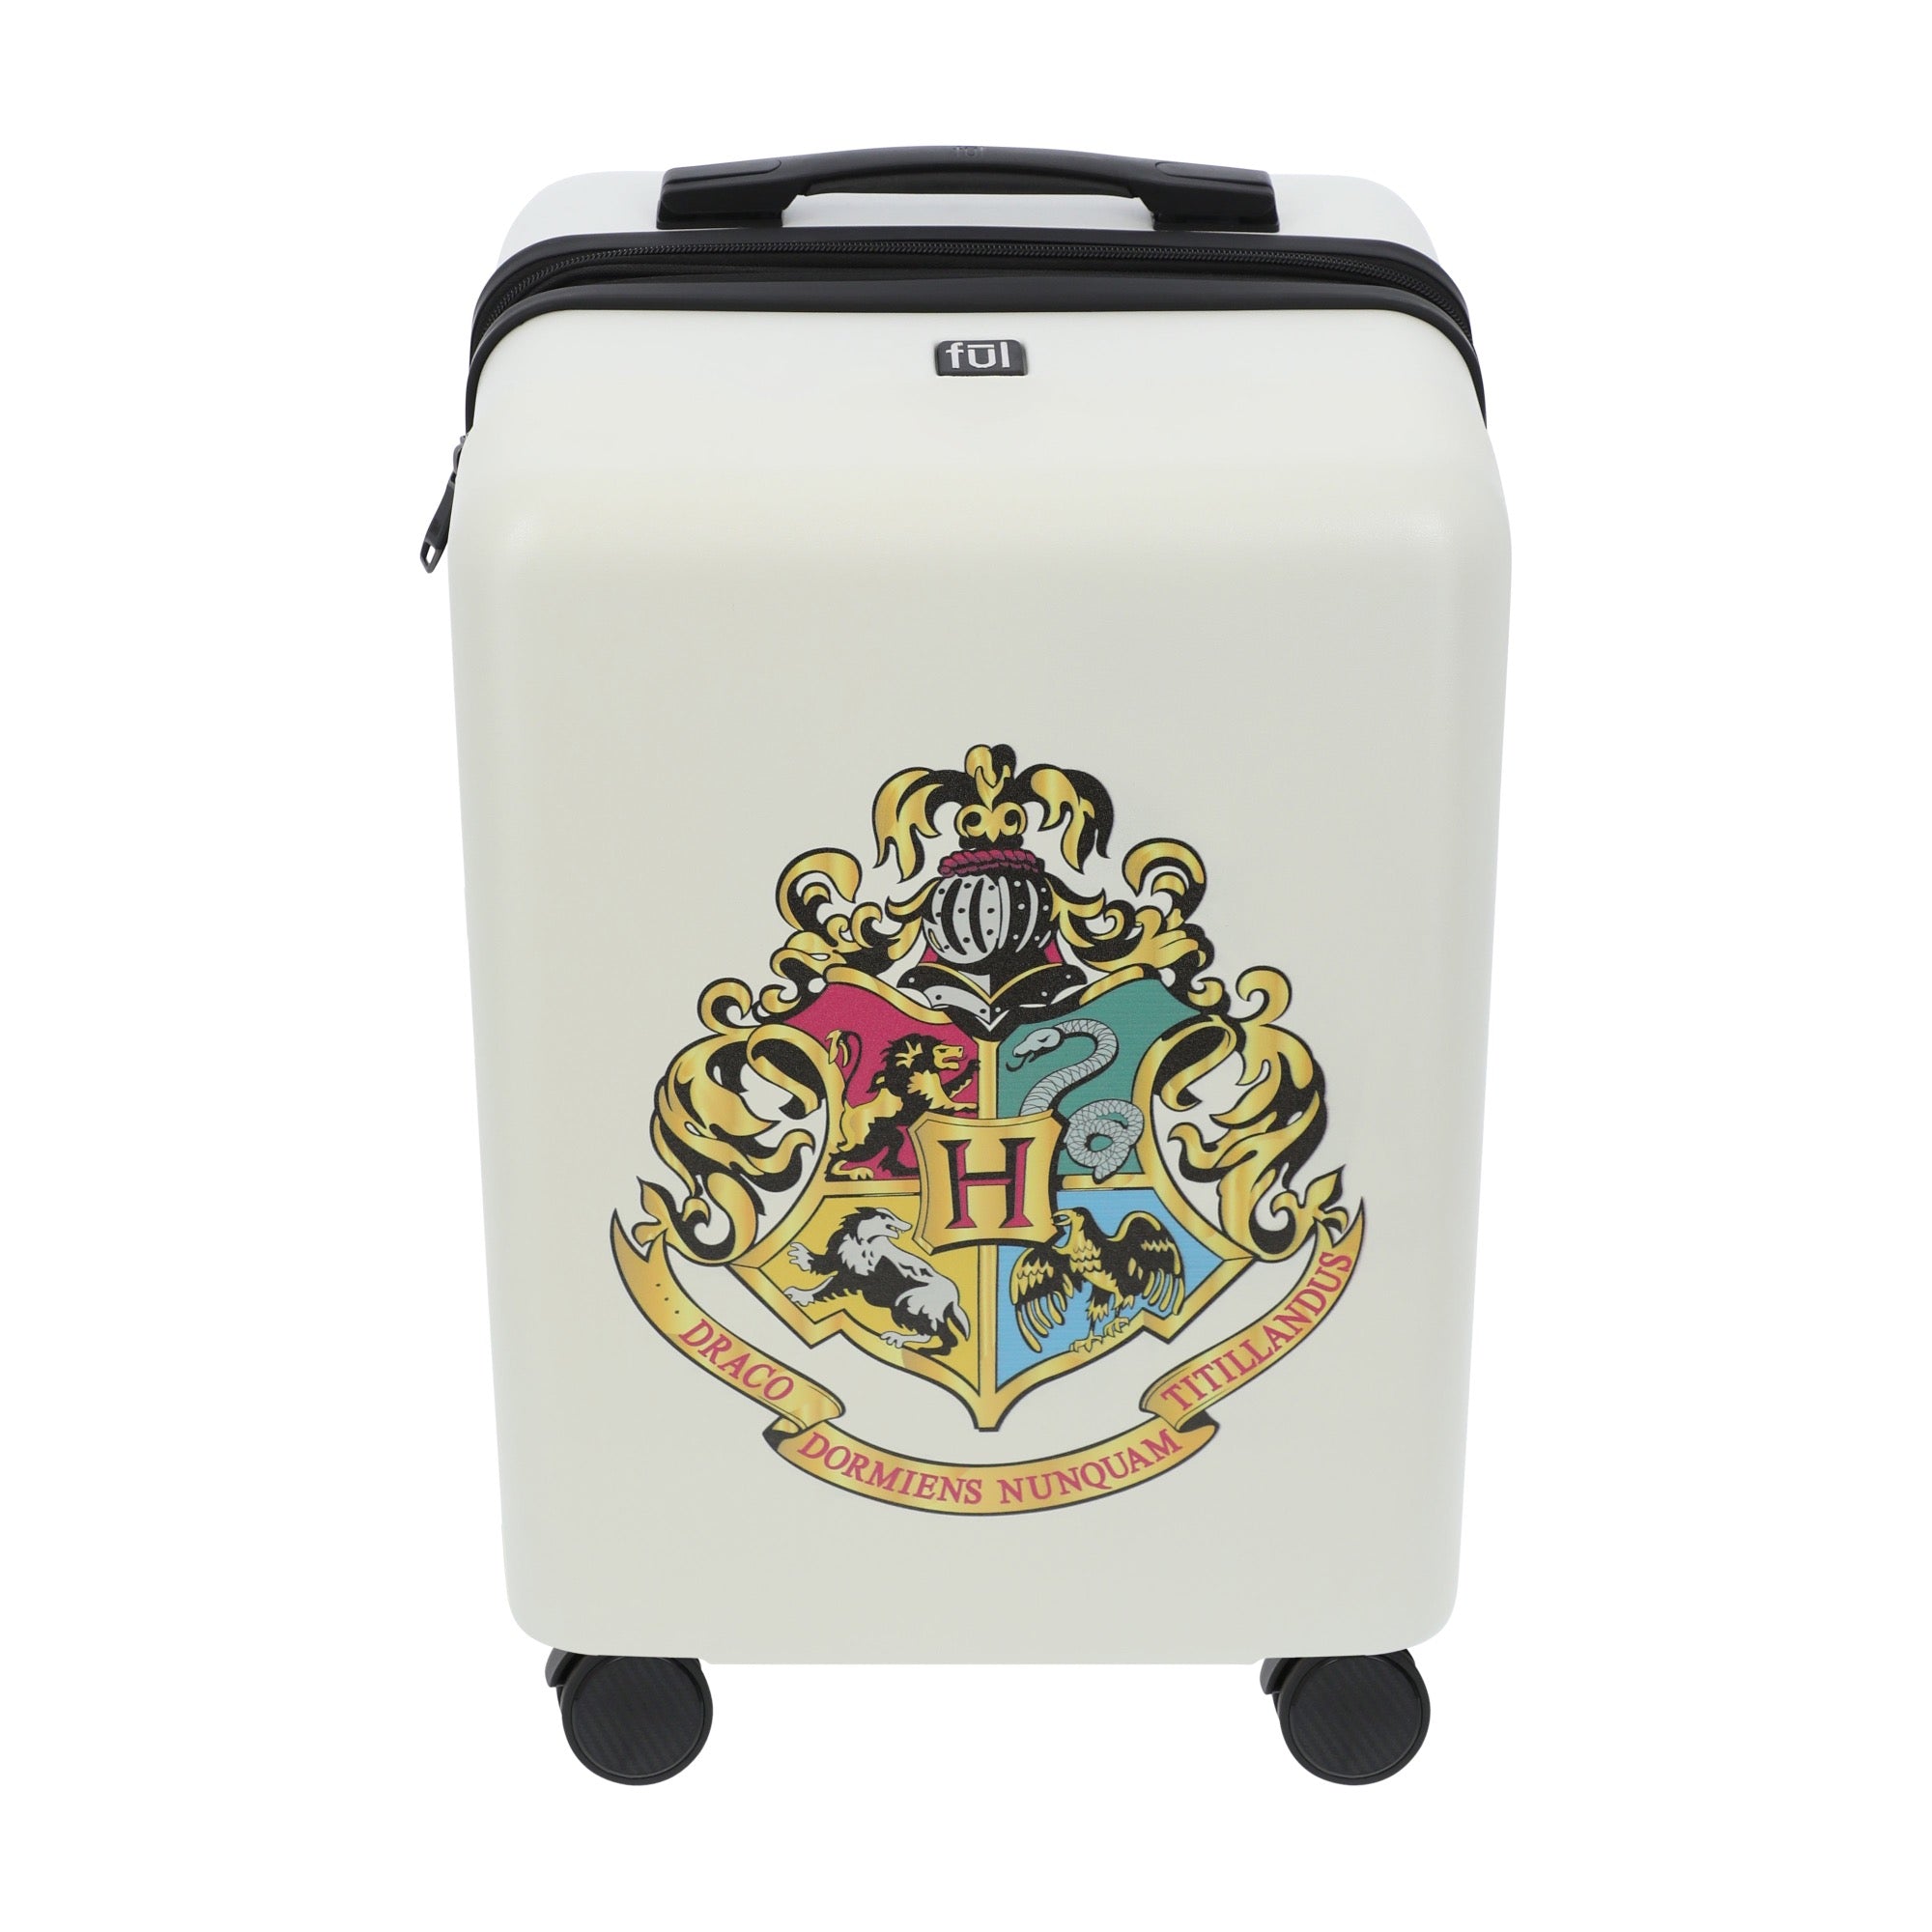 White WB harry potter 22.5" carry-on spinner suitcase luggage by Ful